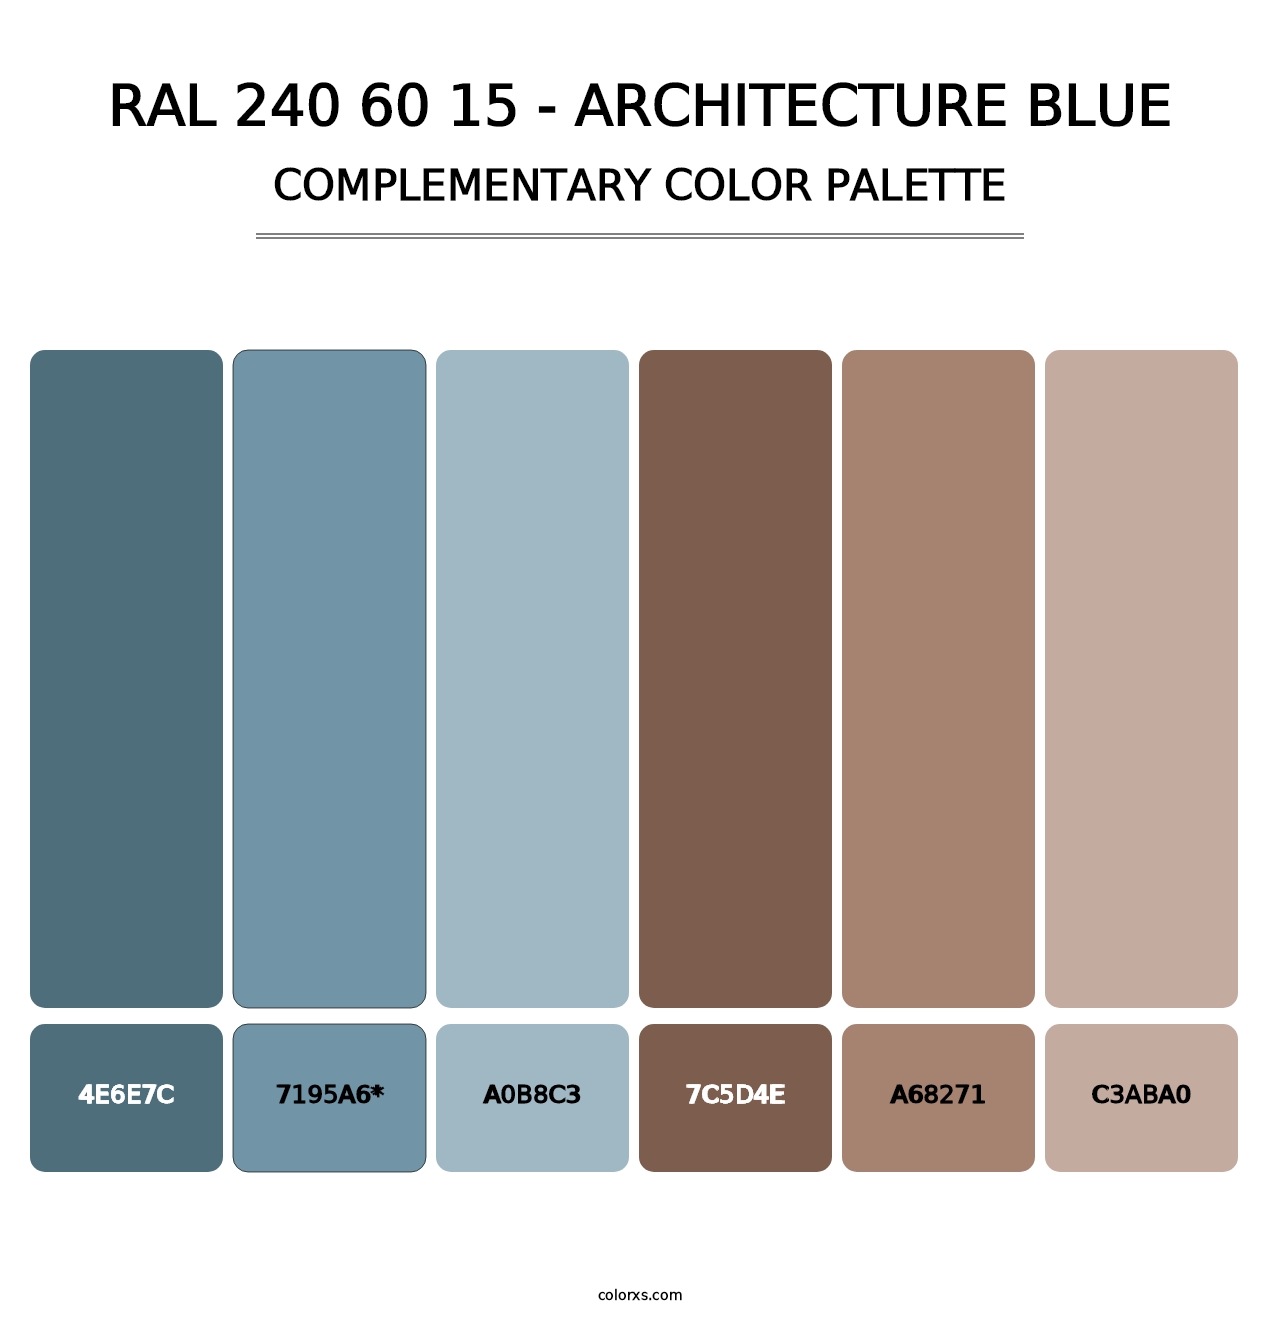 RAL 240 60 15 - Architecture Blue - Complementary Color Palette